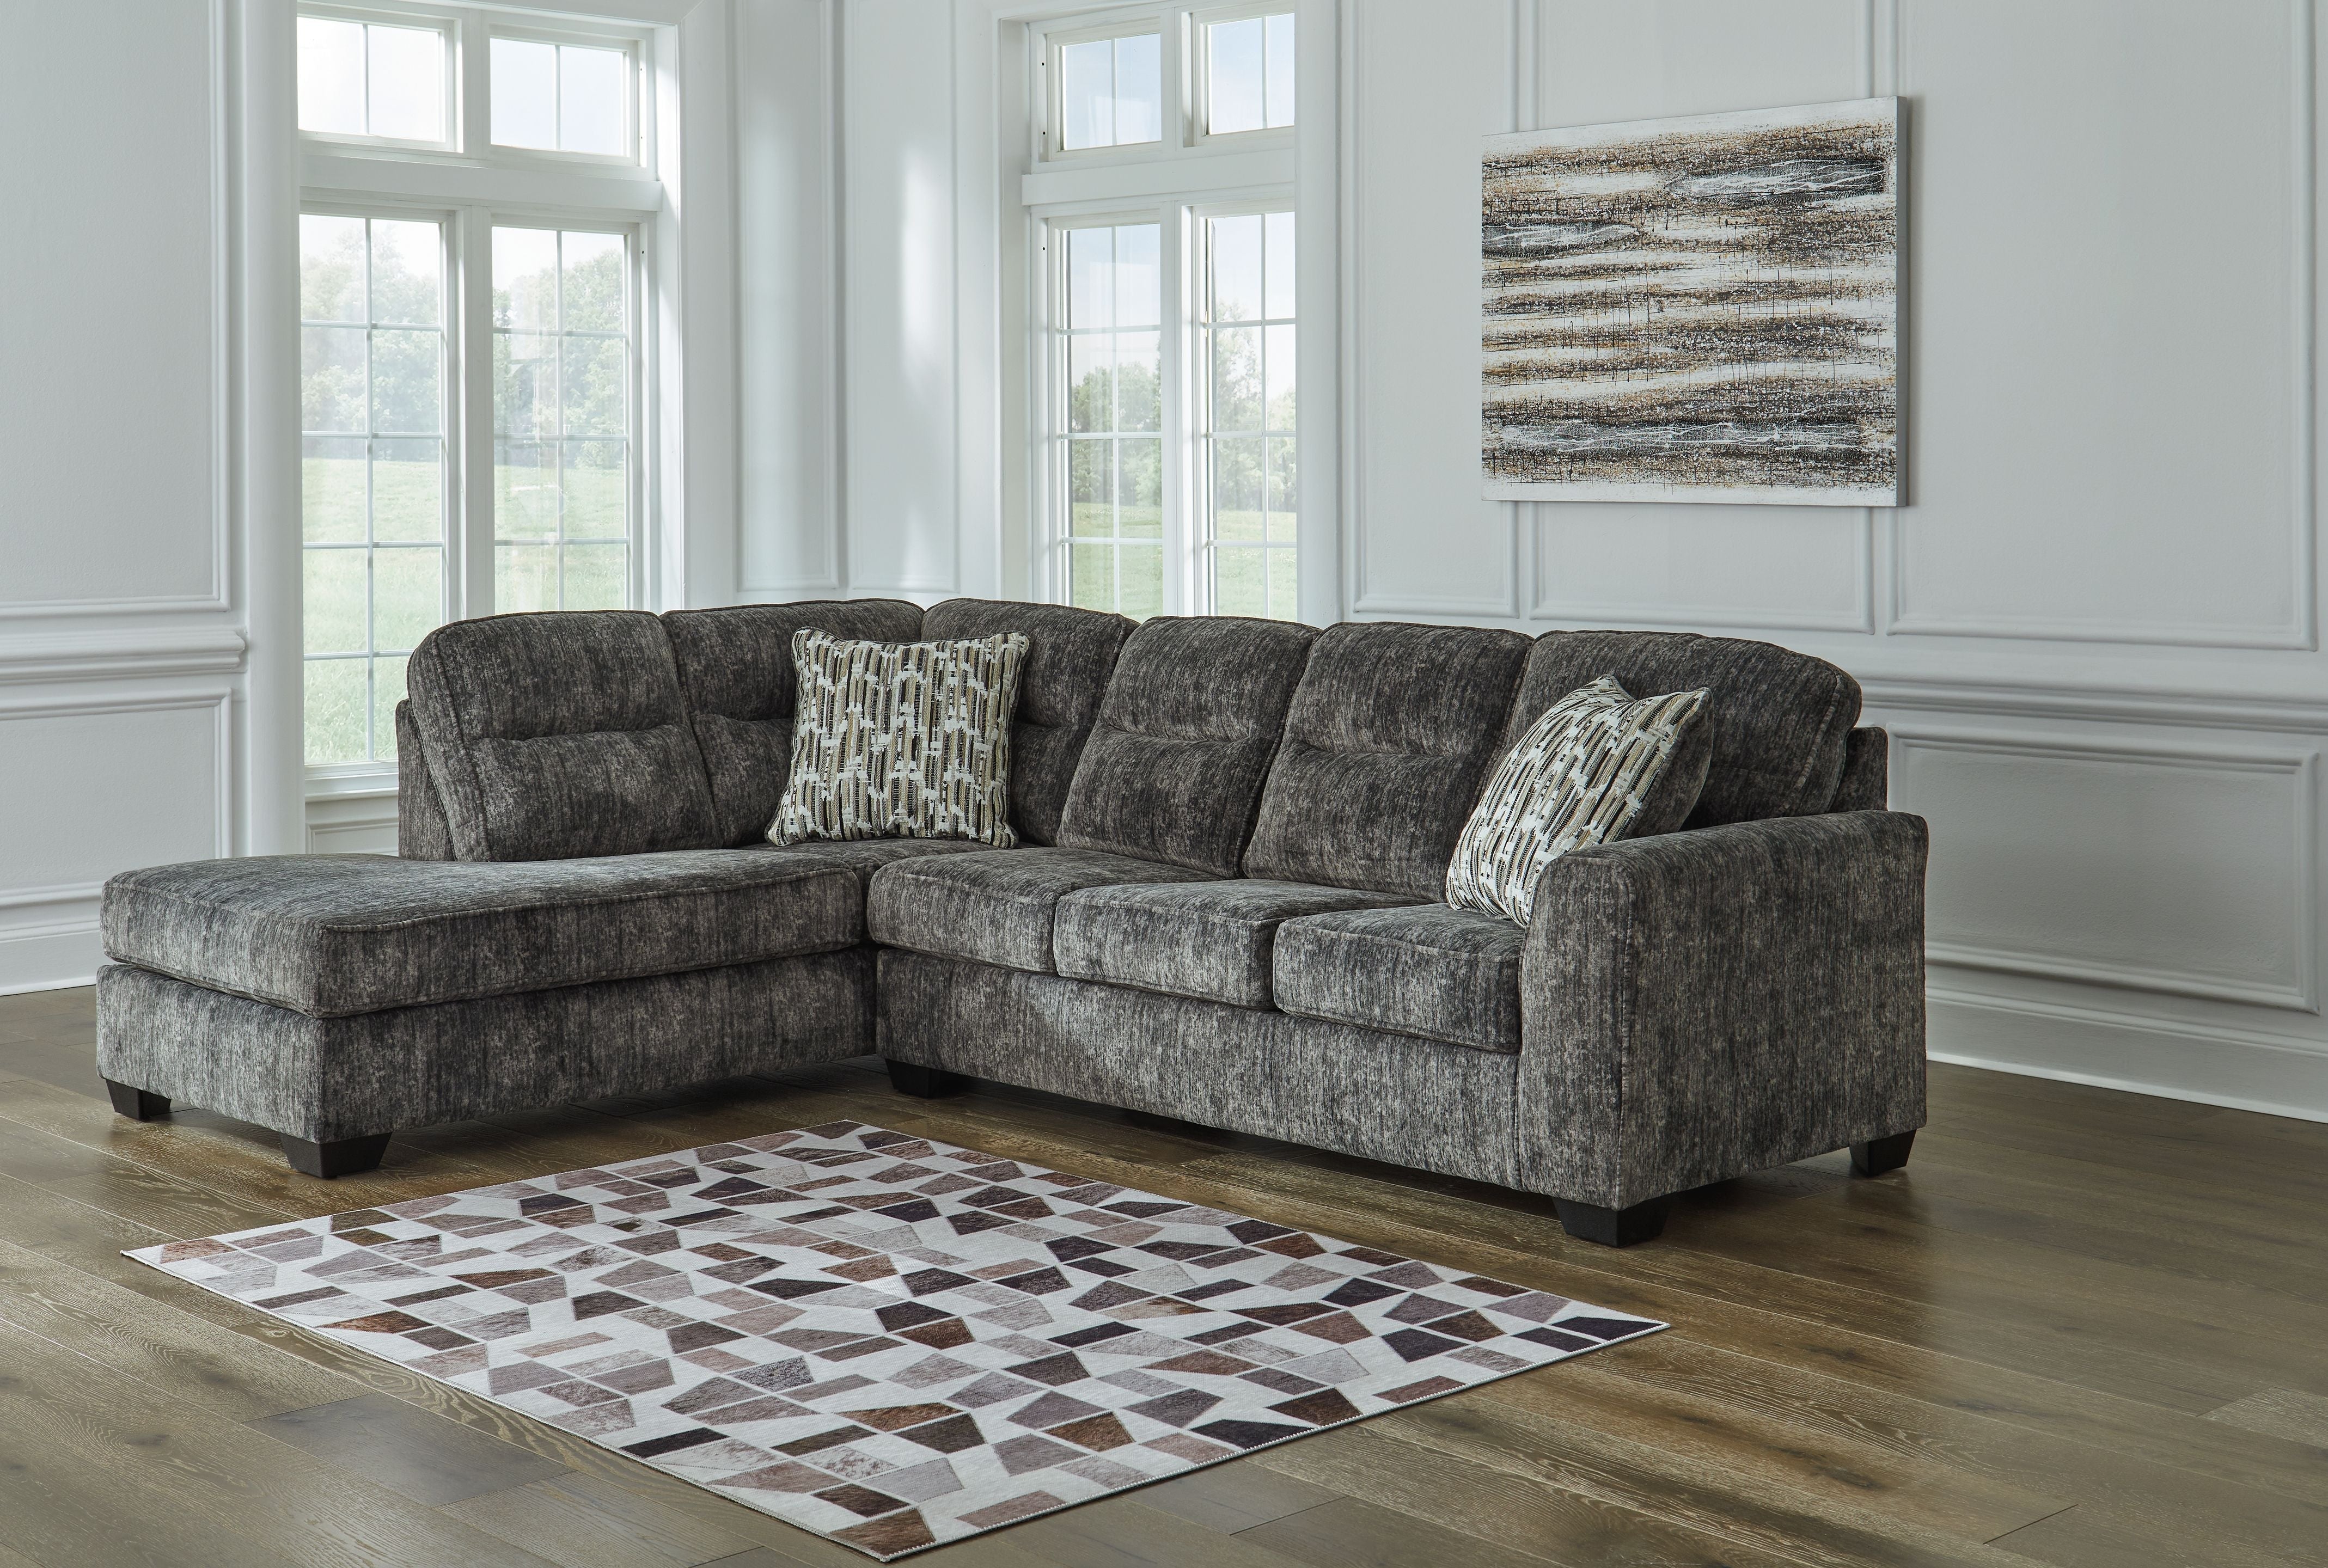 Lonoke 2-Piece Plush Fabric Sectional-Stationary Sectionals-American Furniture Outlet